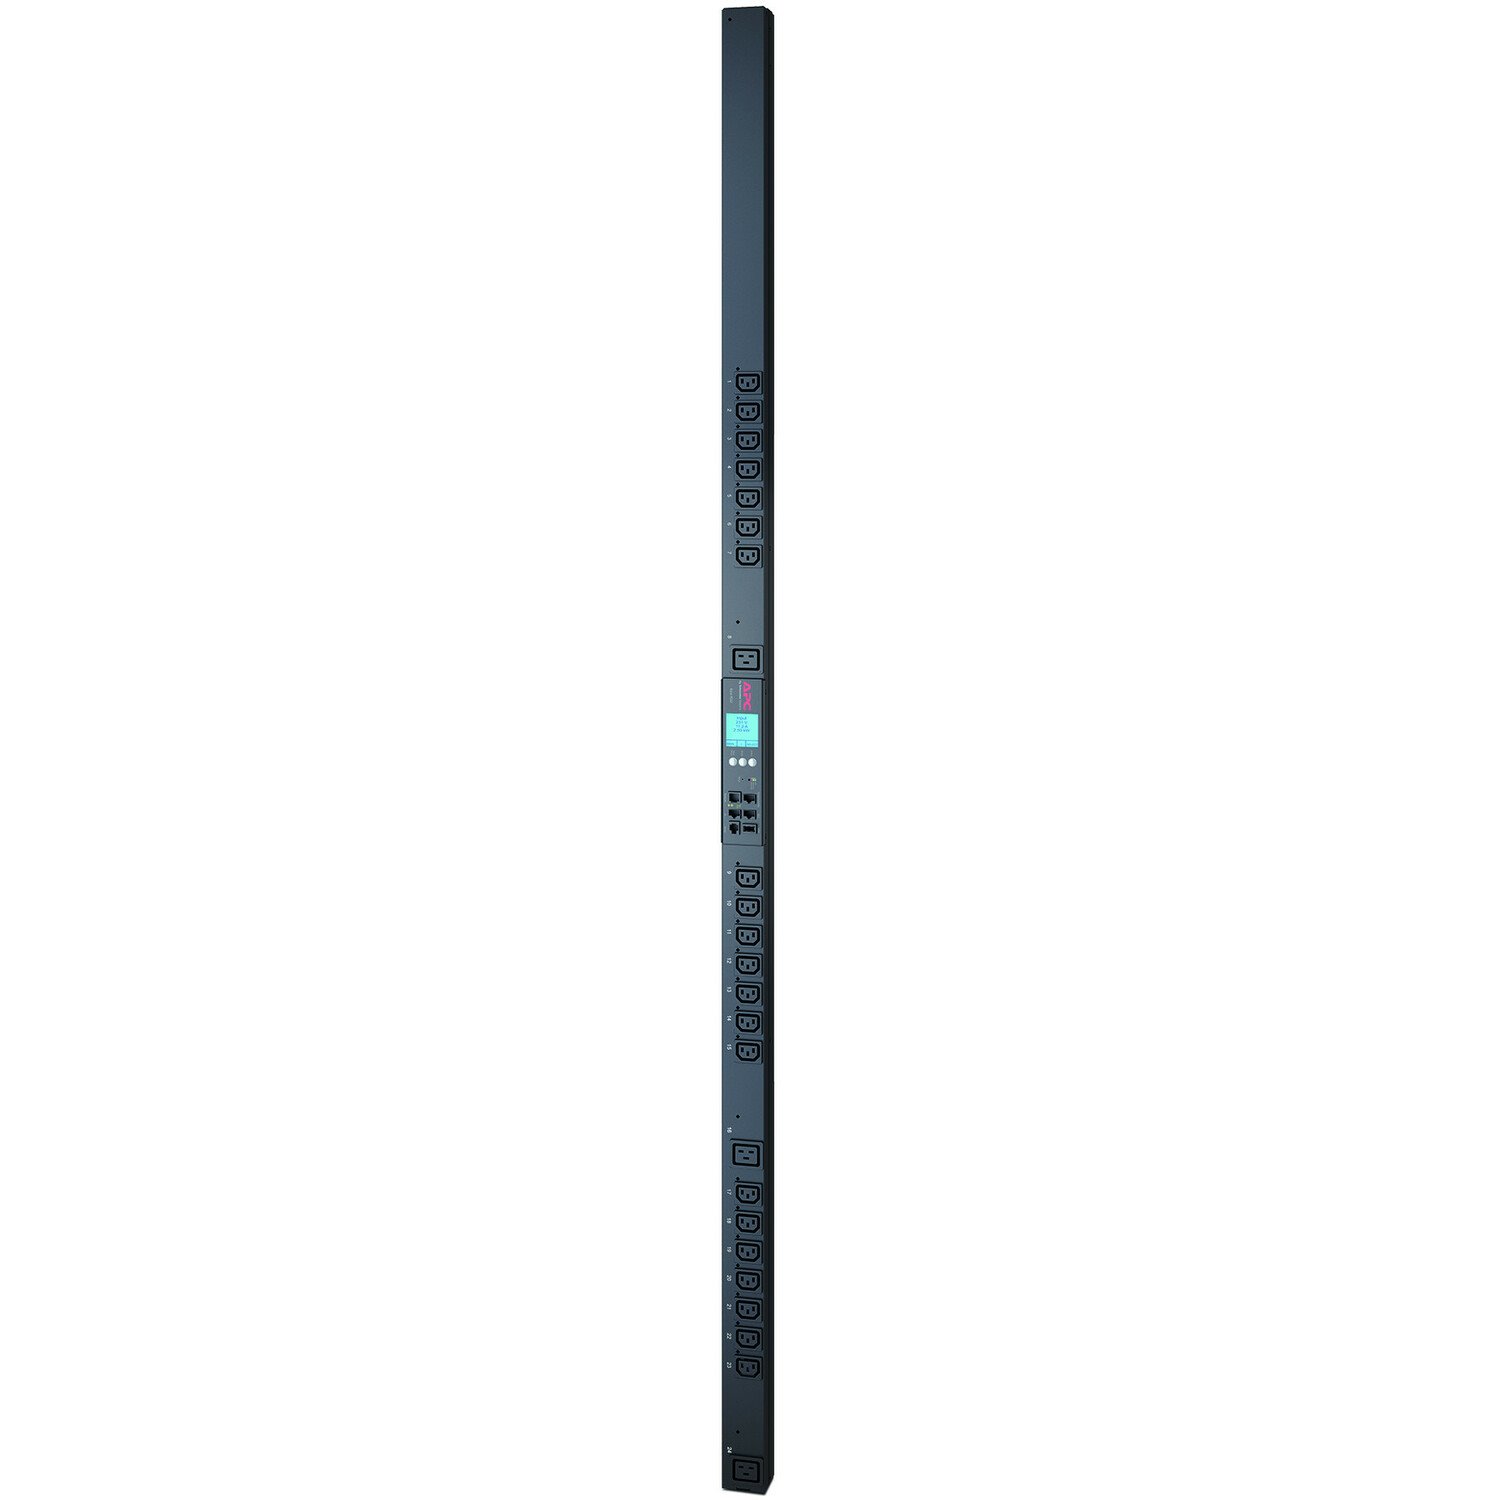 AP8659 APC by Schneider Electric Rack PDU 2G, Metered by Outlet with Switching, ZeroU, 16A, 230V, (21) C13 & (3) C19